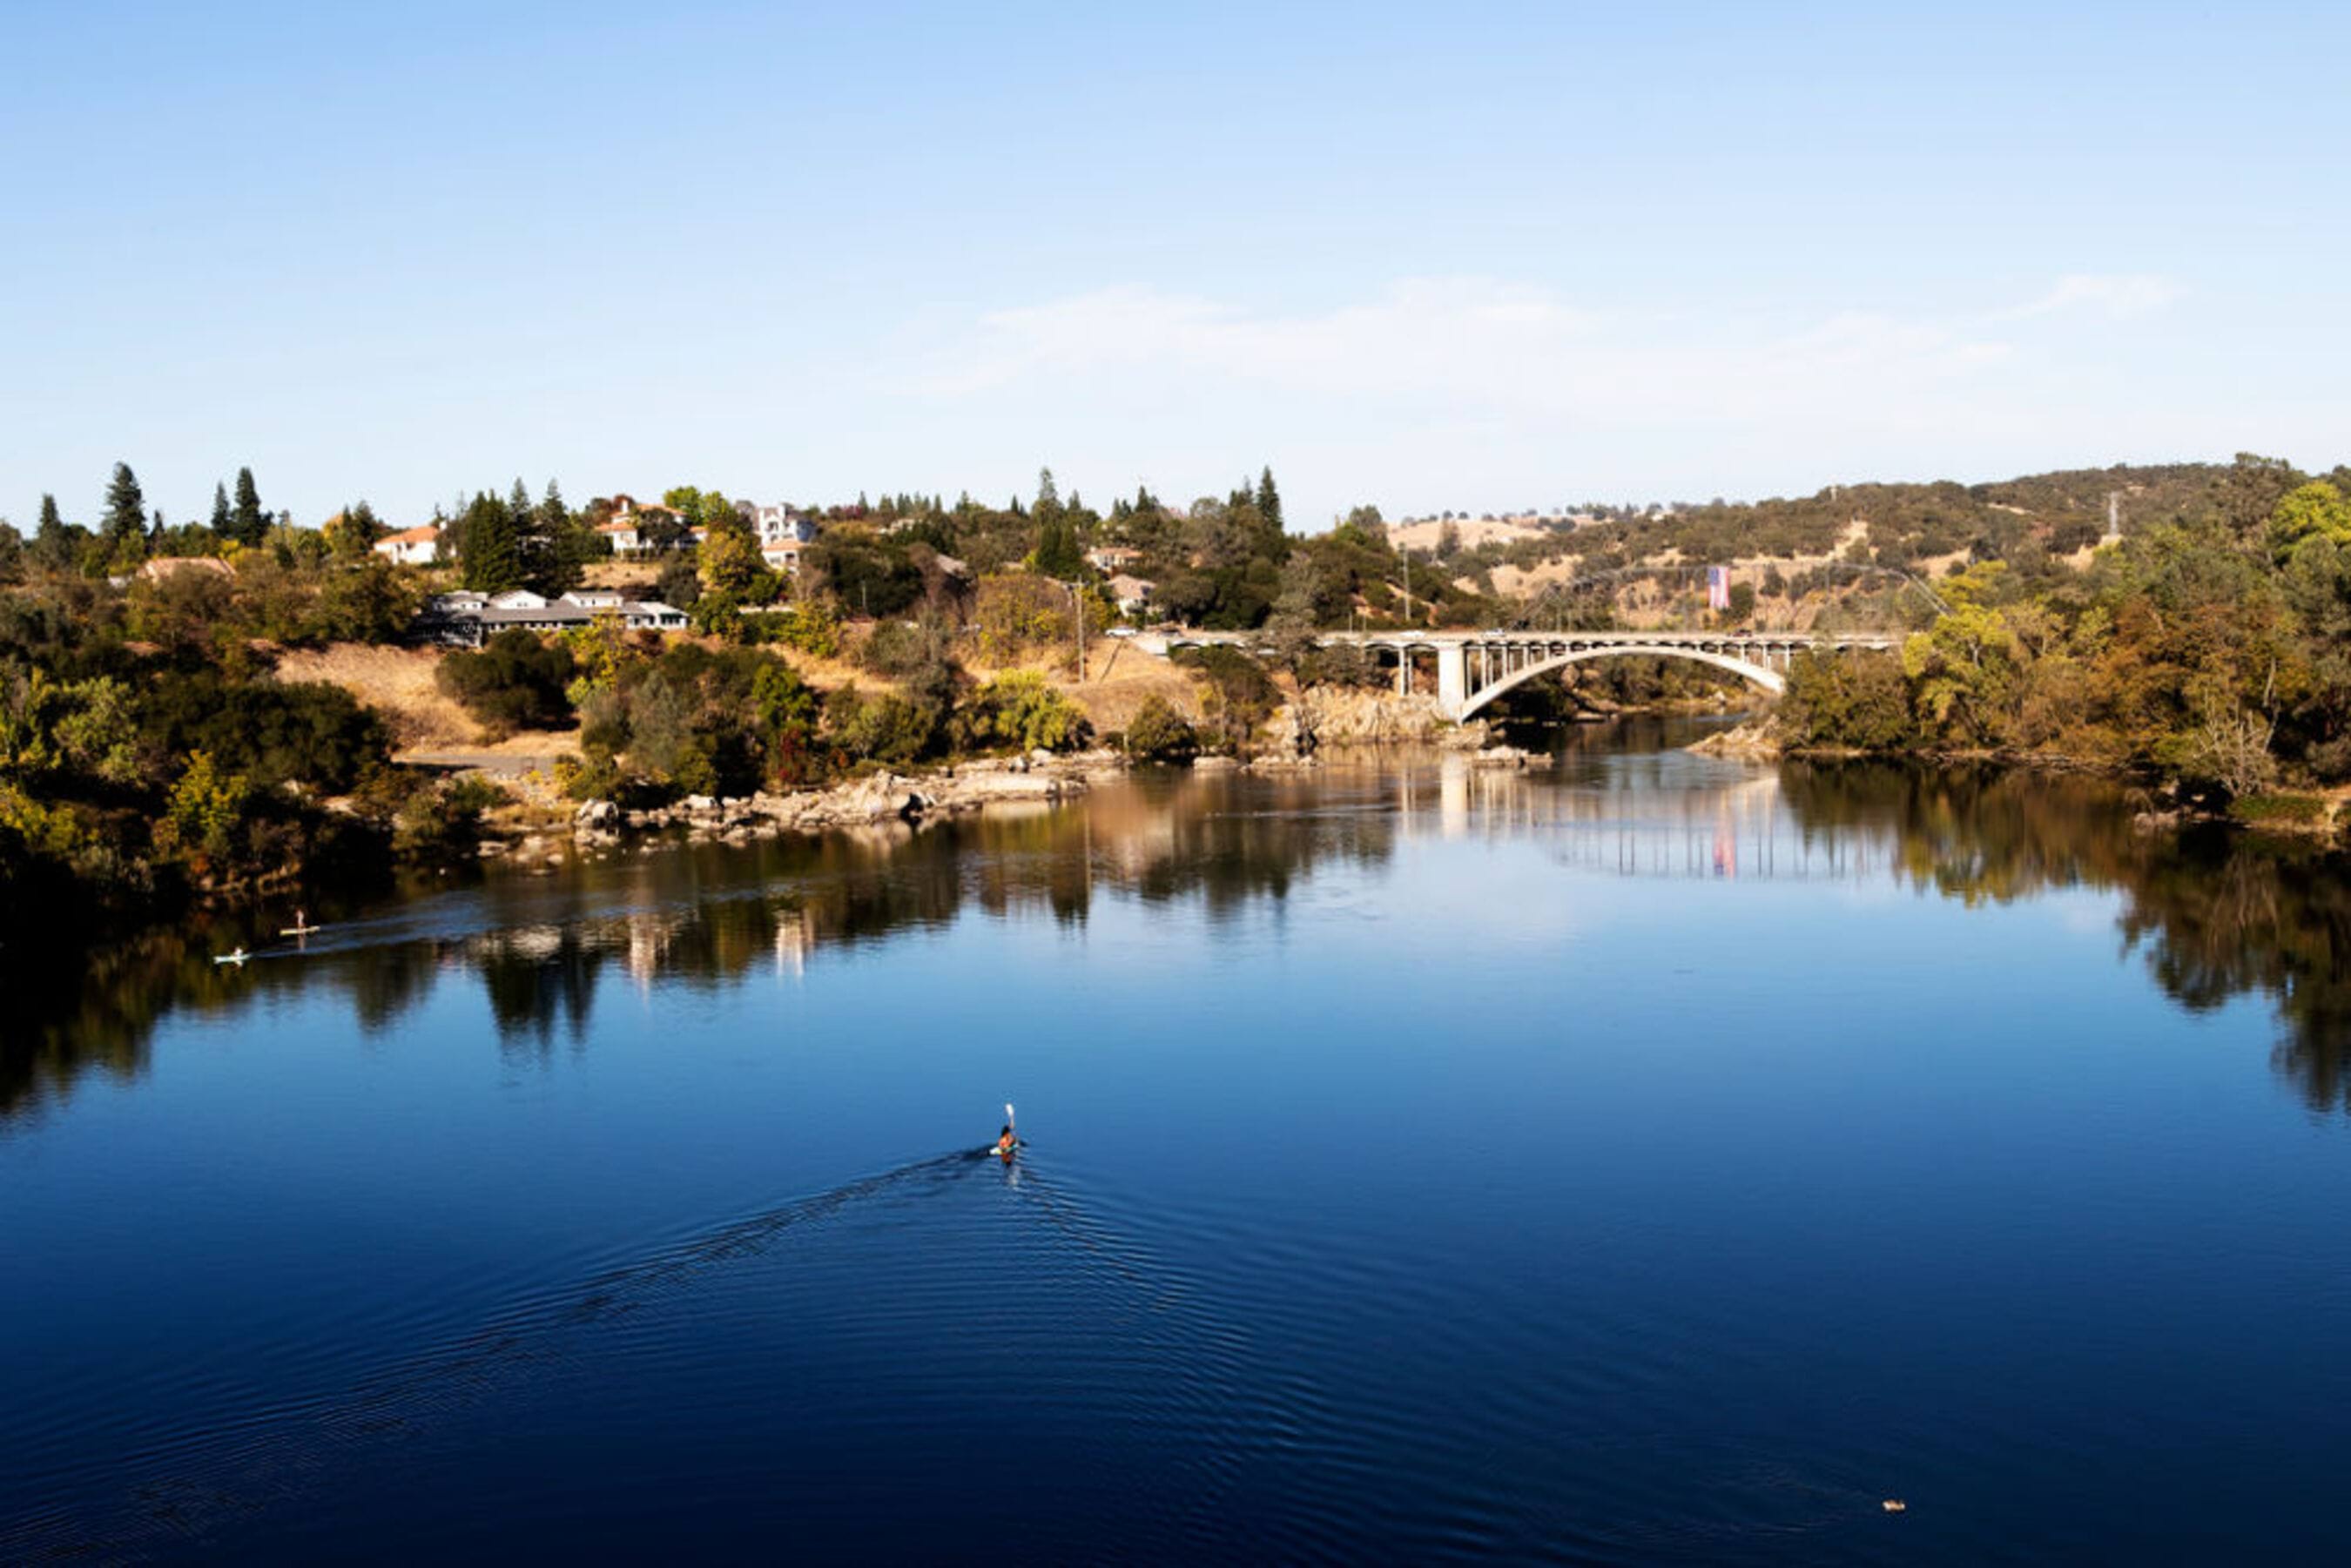 View of the lake on a beautiful day at Lake Pointe Apartments in Folsom, California